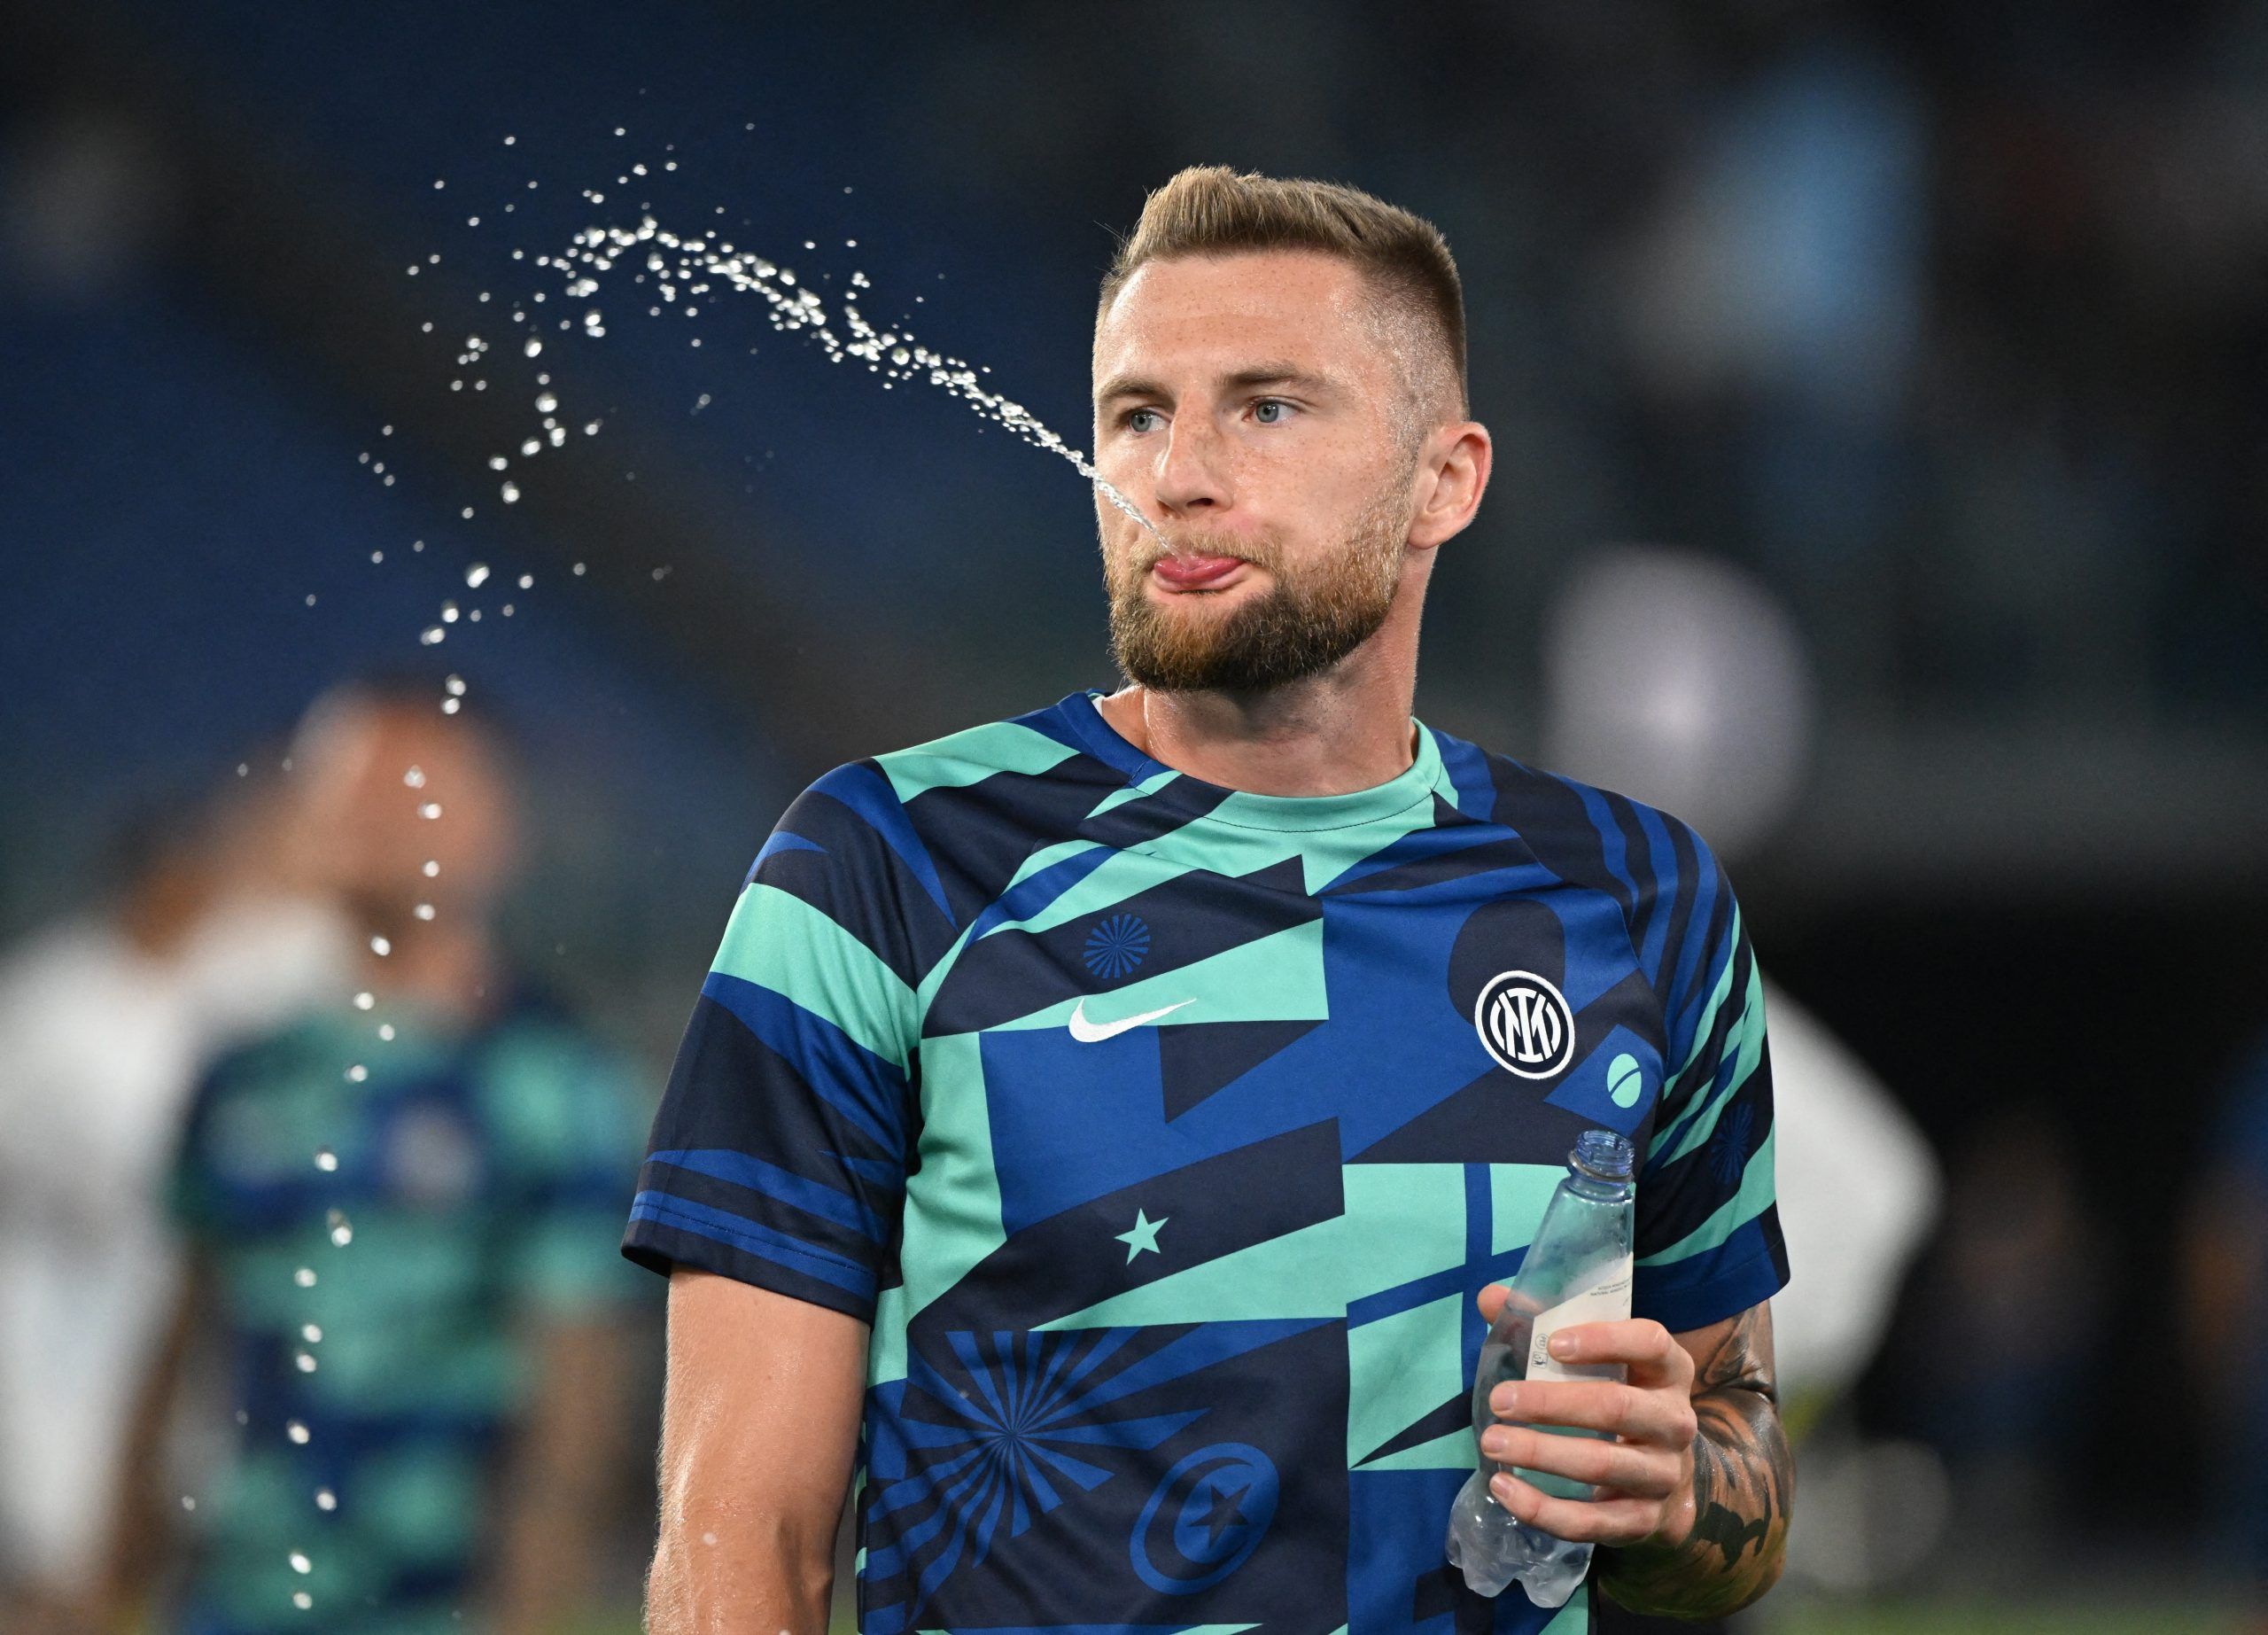 Soccer Football - Serie A - Lazio v Inter Milan - Stadio Olimpico, Rome, Italy - August 26, 2022 Inter Milan's Milan Skriniar during the warm up before the match REUTERS/Alberto Lingria